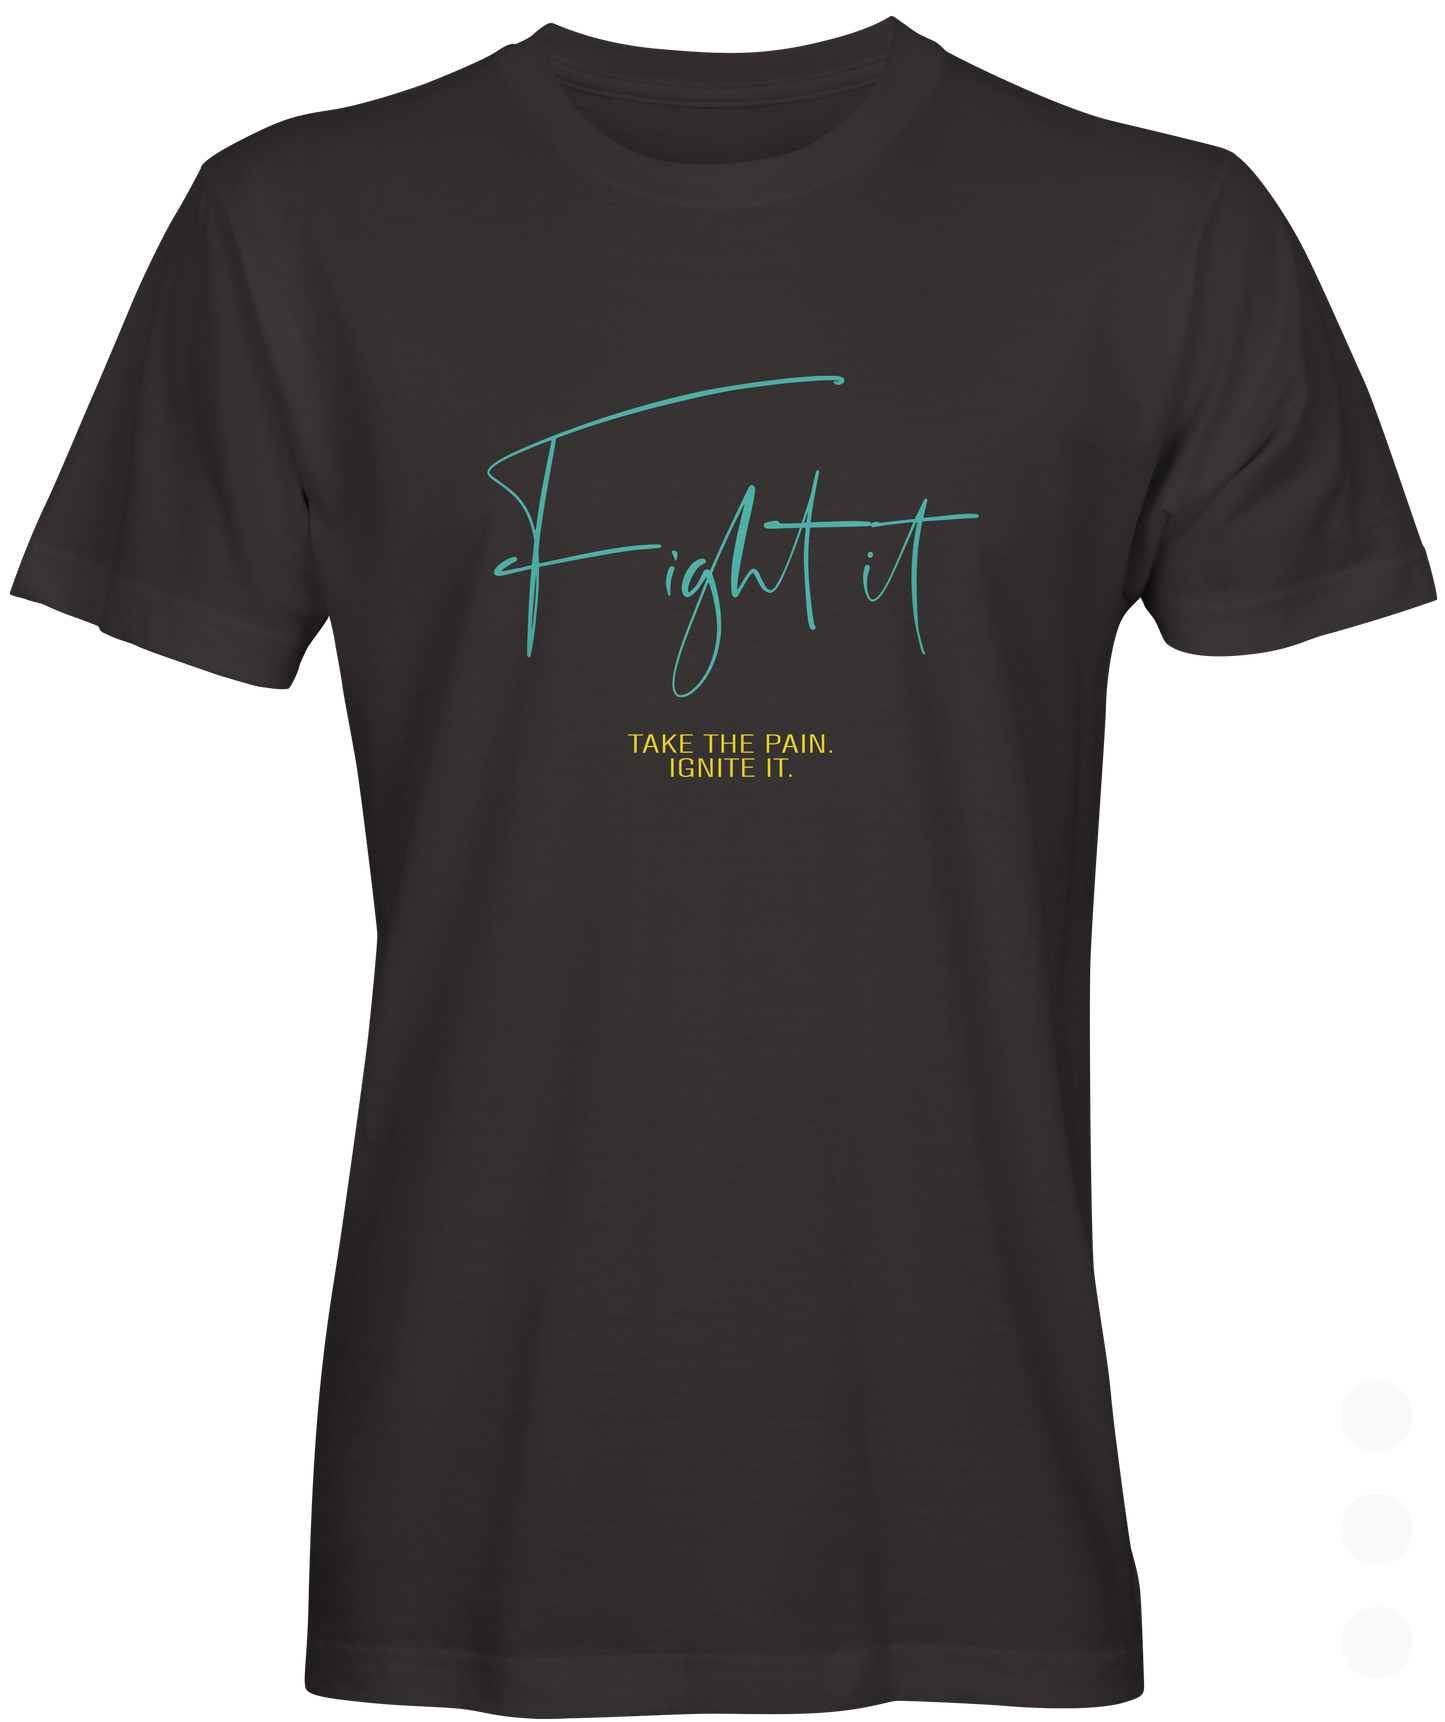  Fight Take The Pain T-shirt